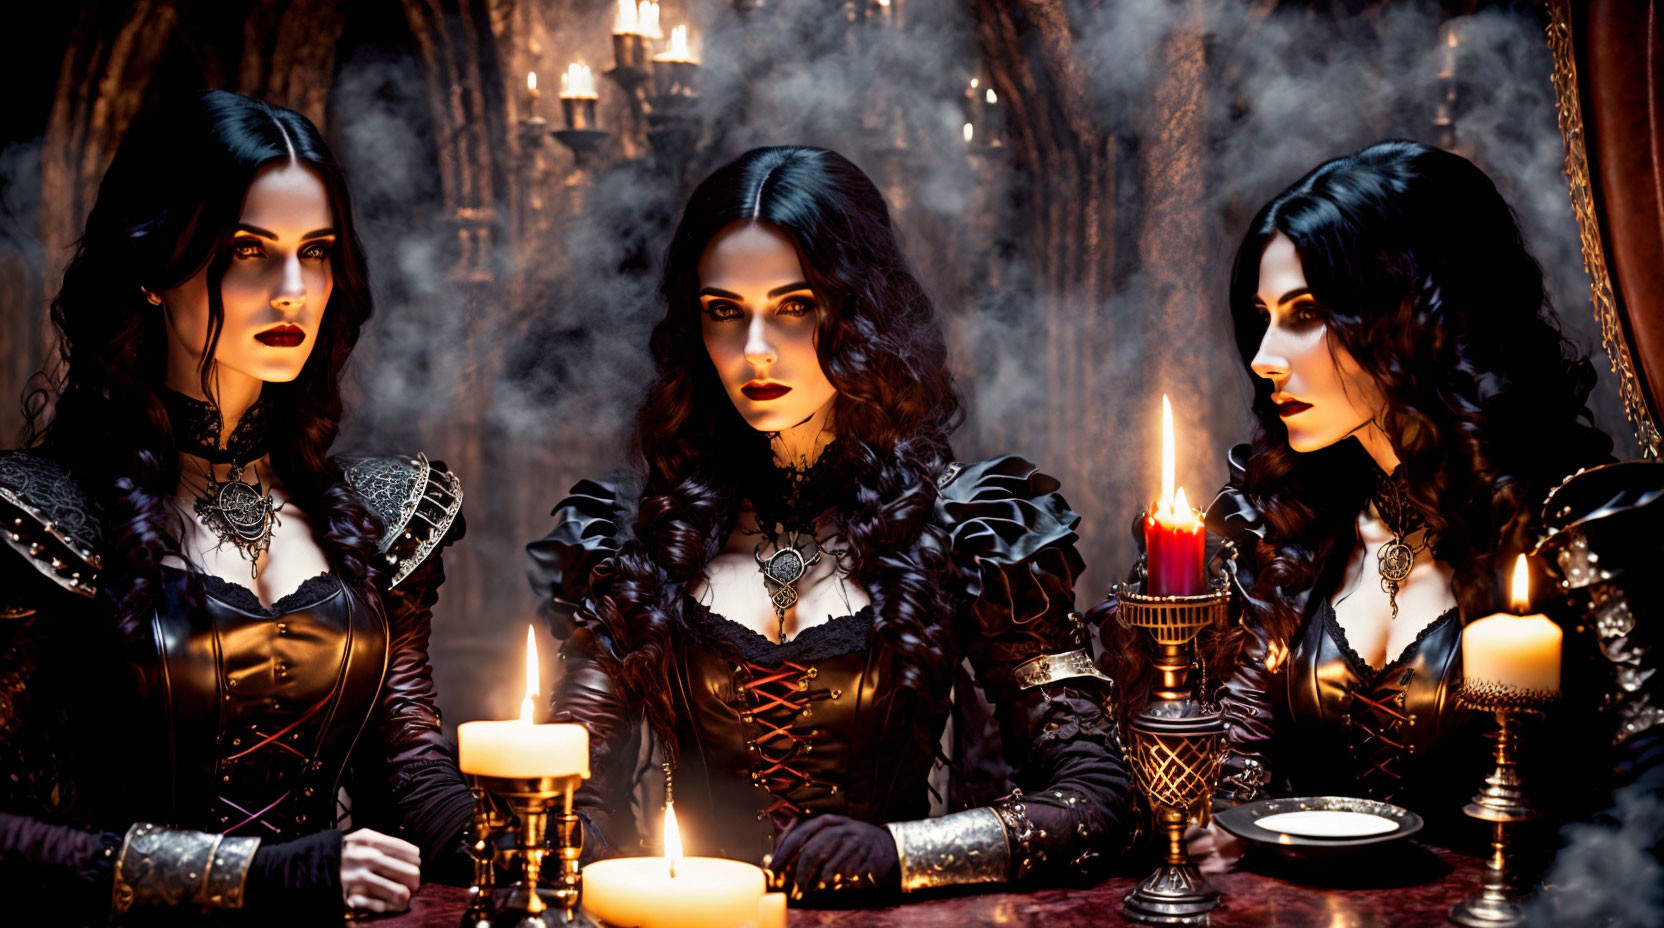 Dissenters of The Vampire Coven